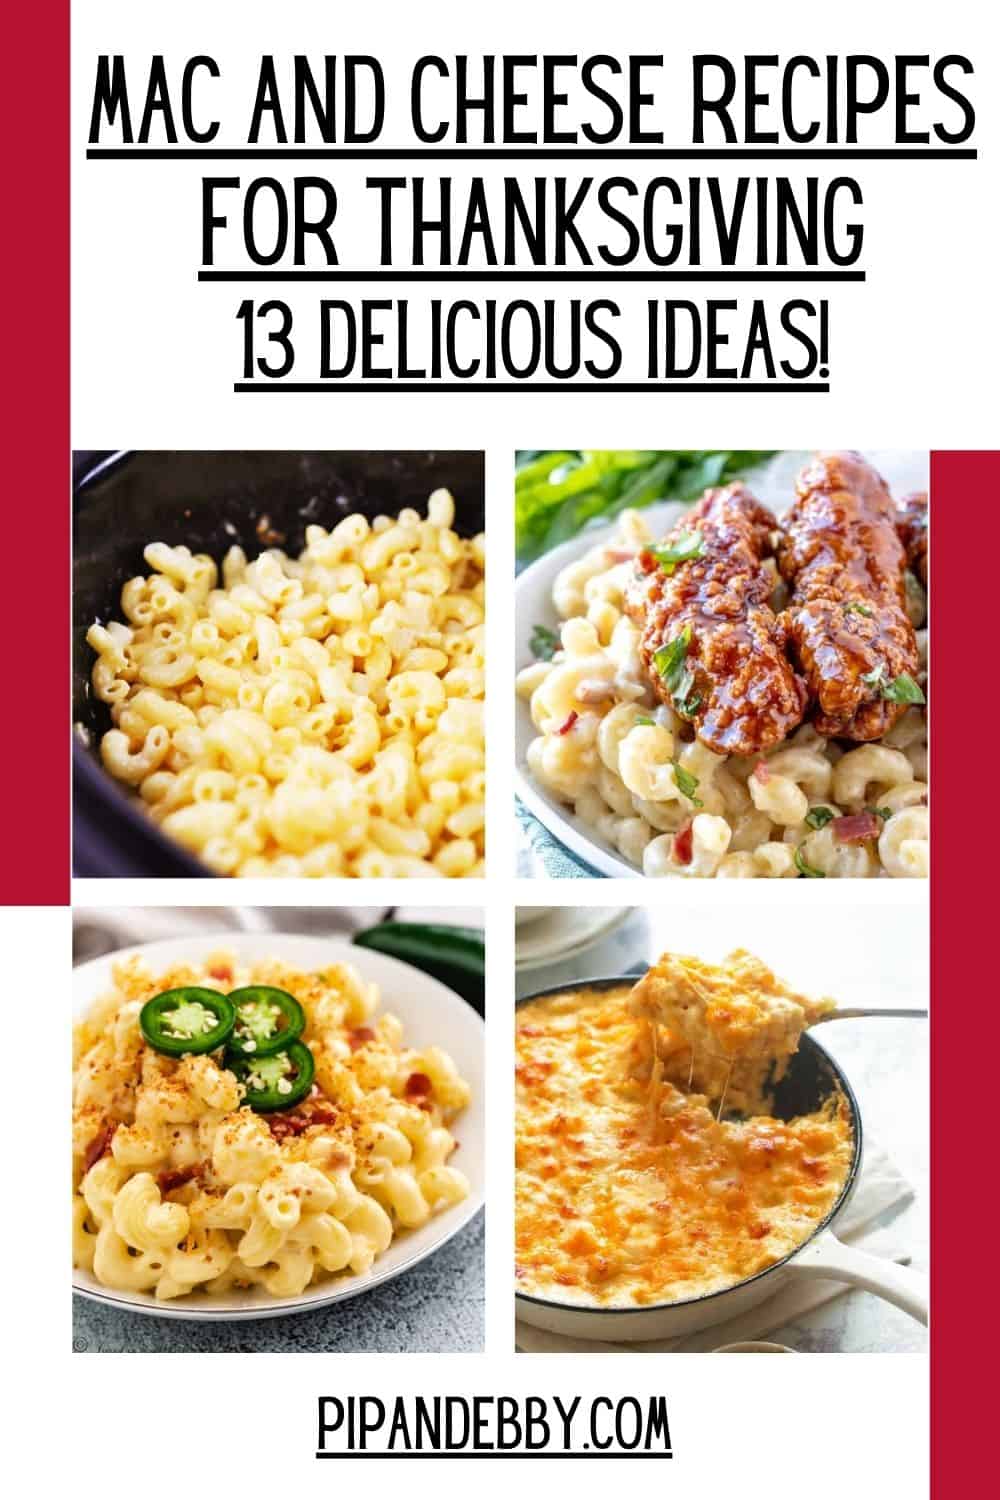 Four different mac and cheese recipes with text on top reading, "Mac and cheese recipes for Thanksgiving - 13 delicious ideas!"